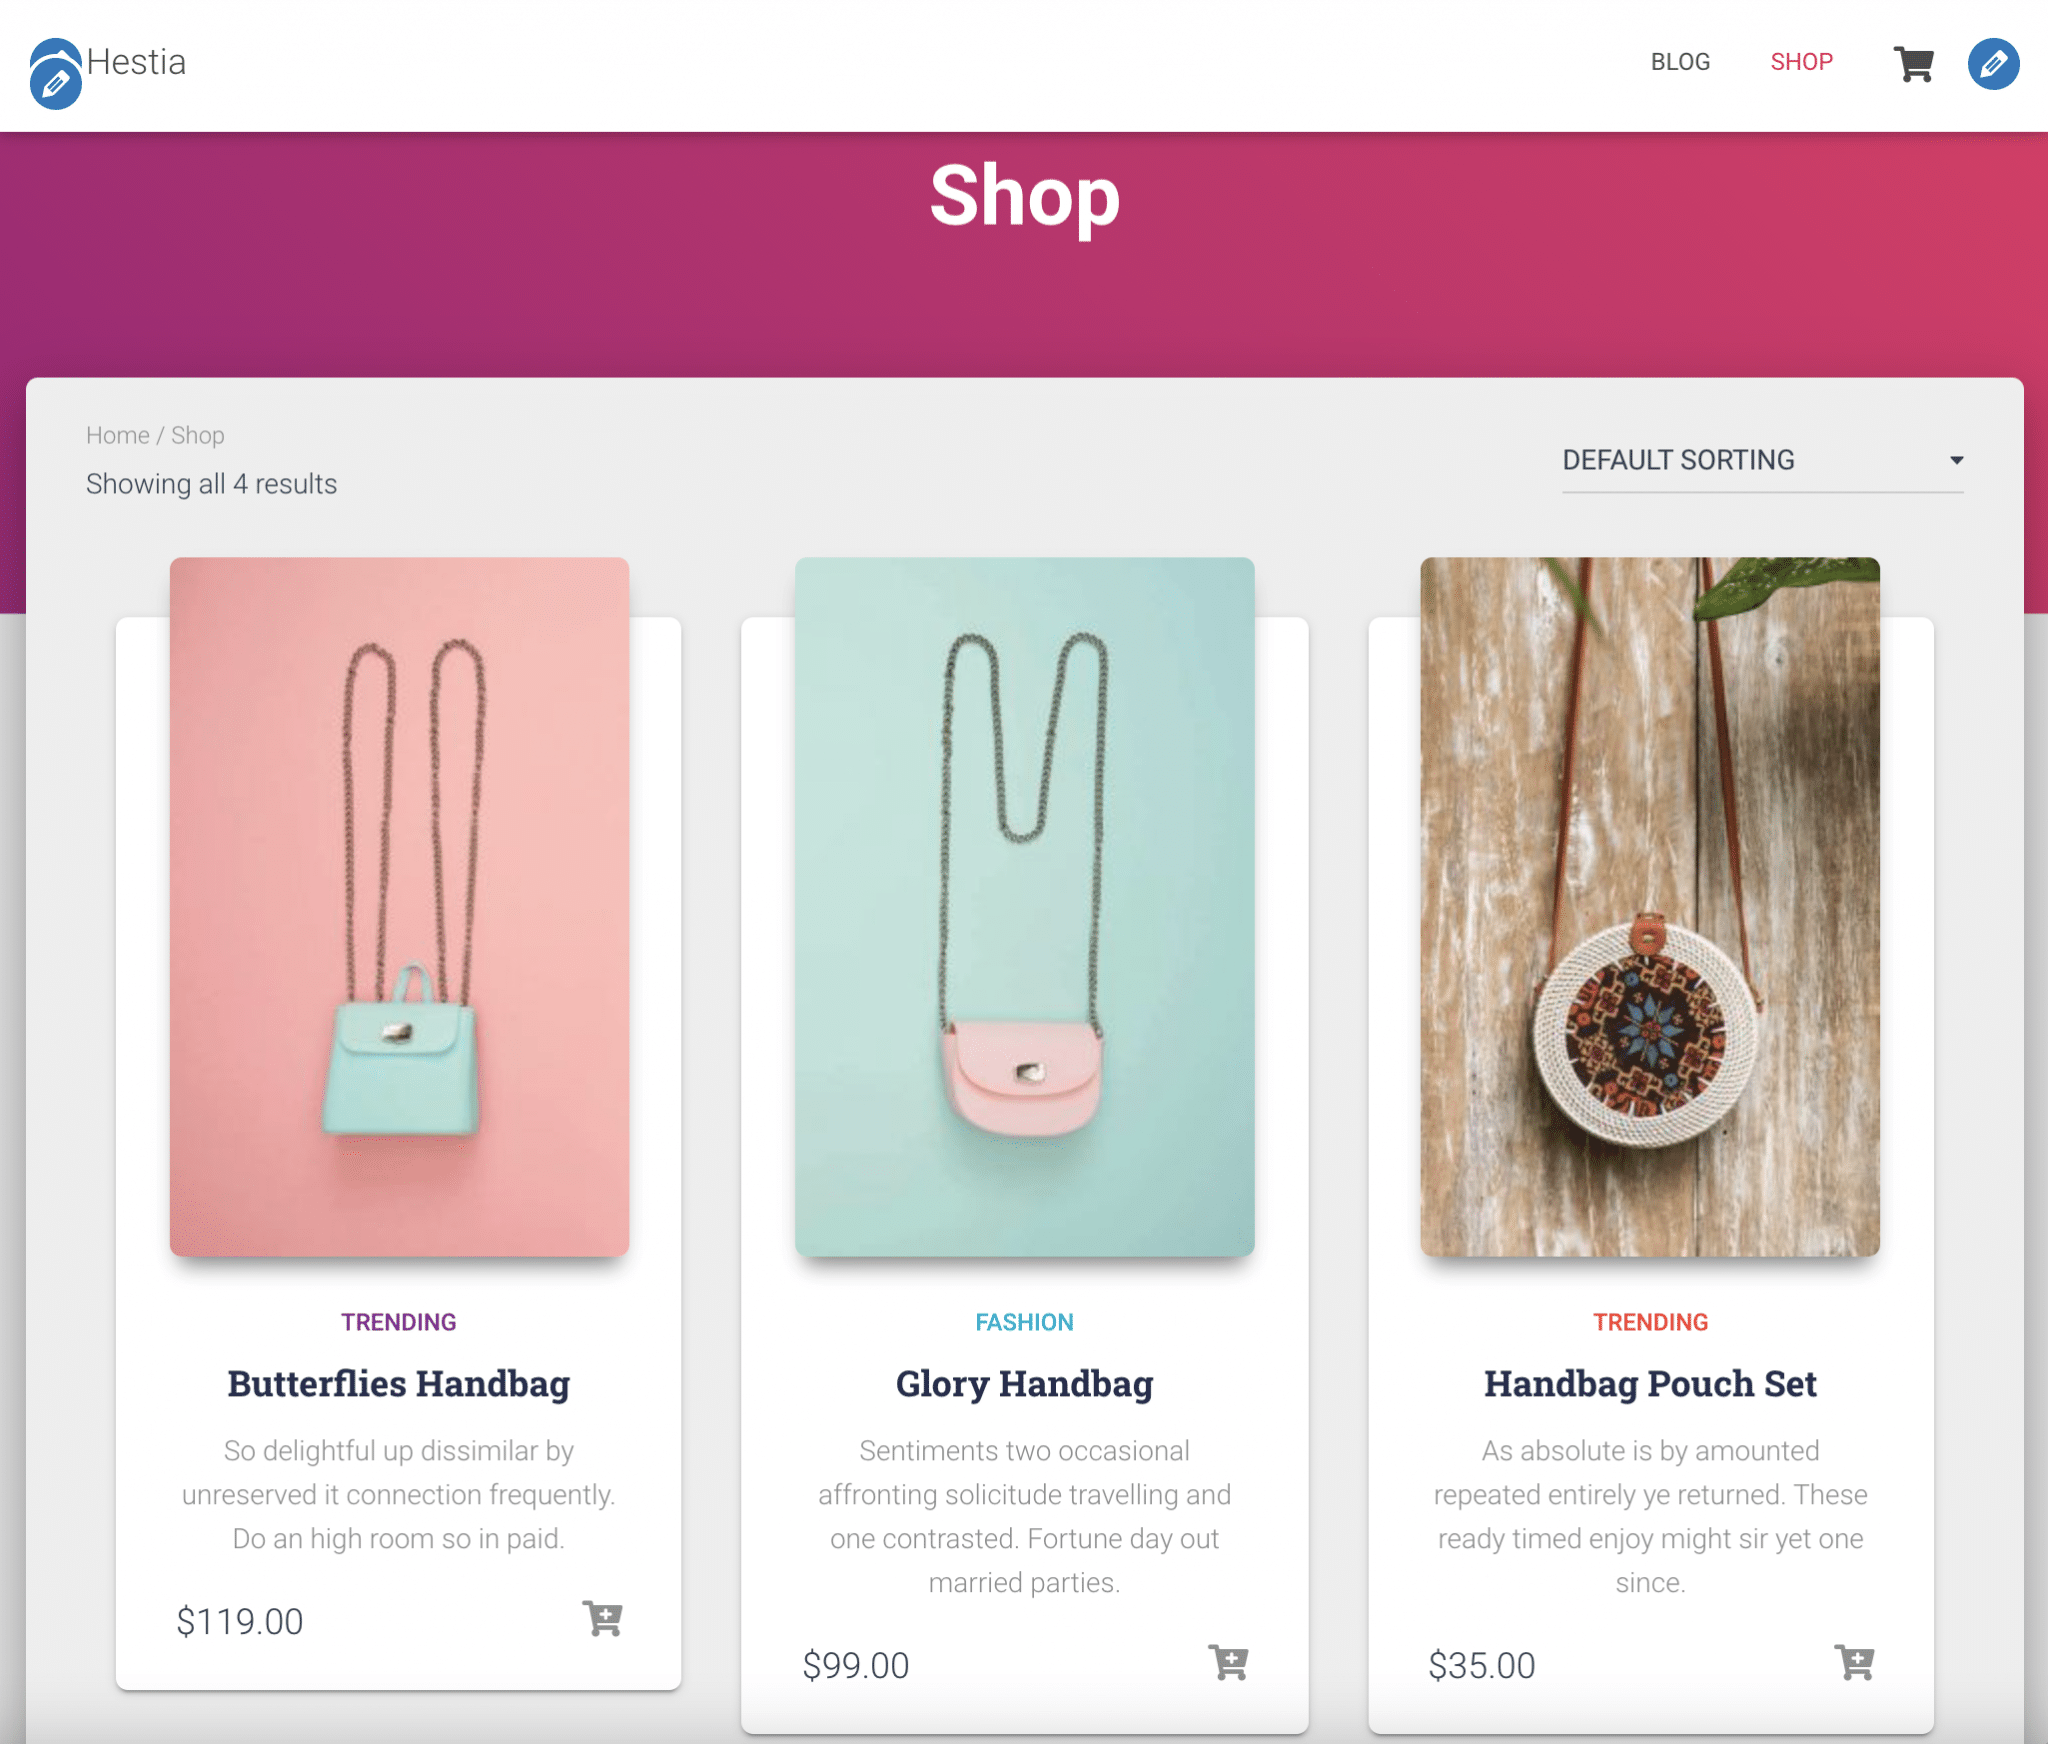 WooCommerce integration with the Hestia WordPress theme displaying the cart icon in the top menu.